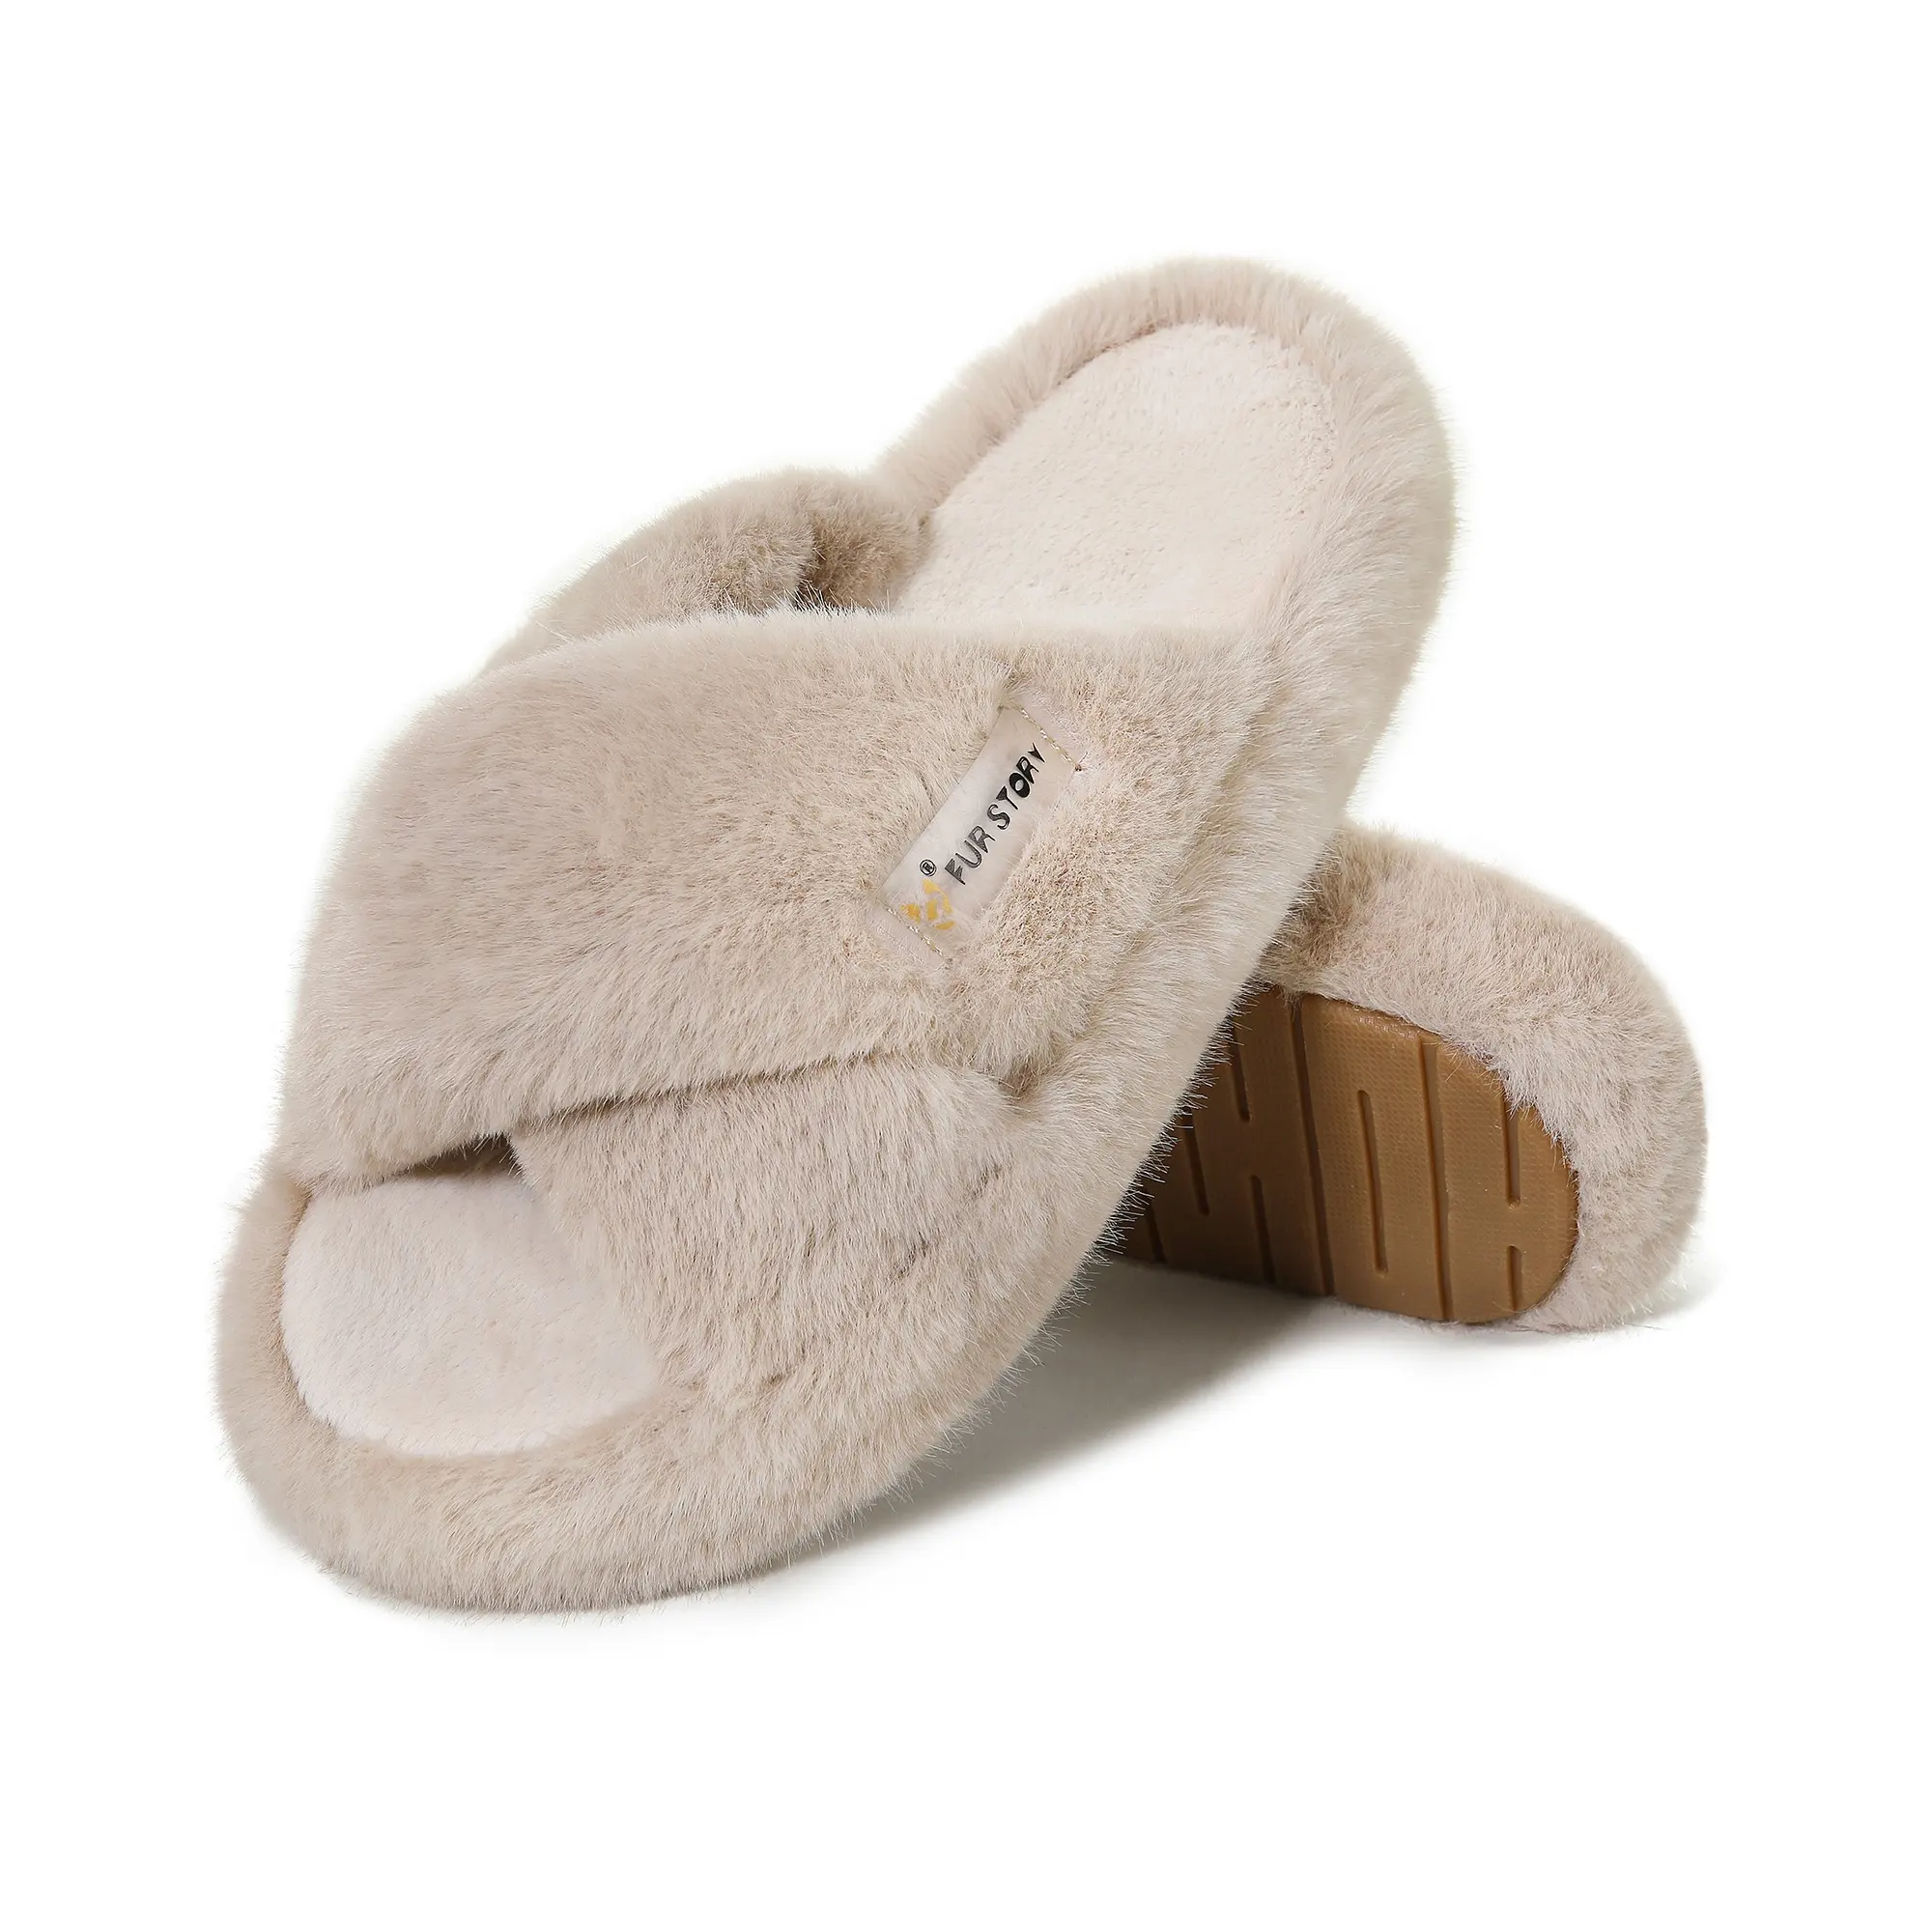 Womens Cross Band Slippers Cozy Furry Fuzzy House Slippers Open Toe Fluffy Indoor Shoes Outdoor Slip on Warm Anti-skid Sole